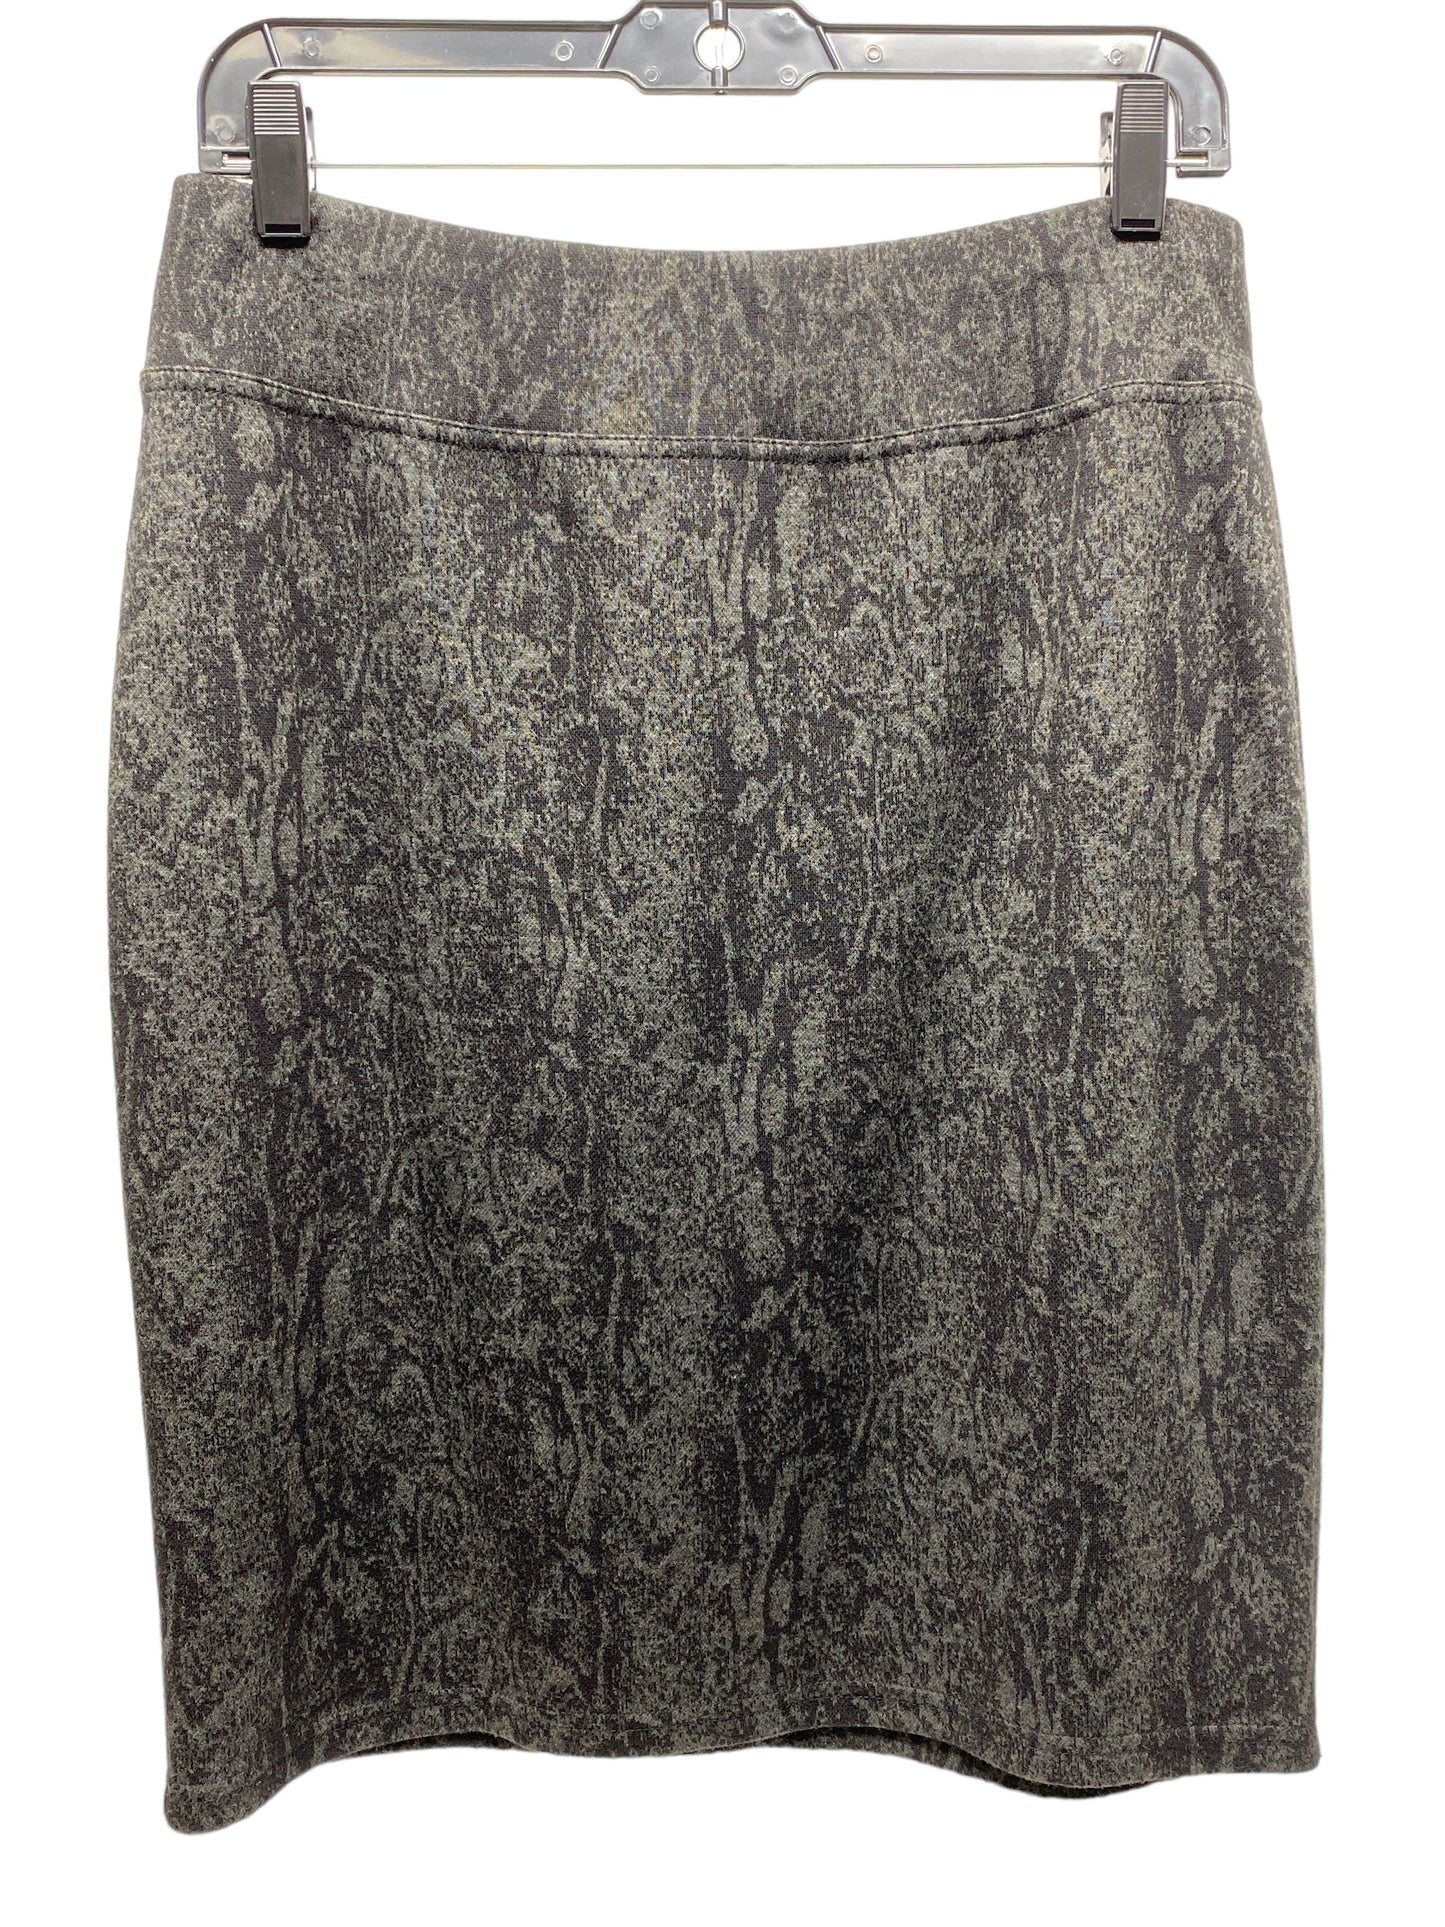 Skirt Mini & Short By Style And Company  Size: M